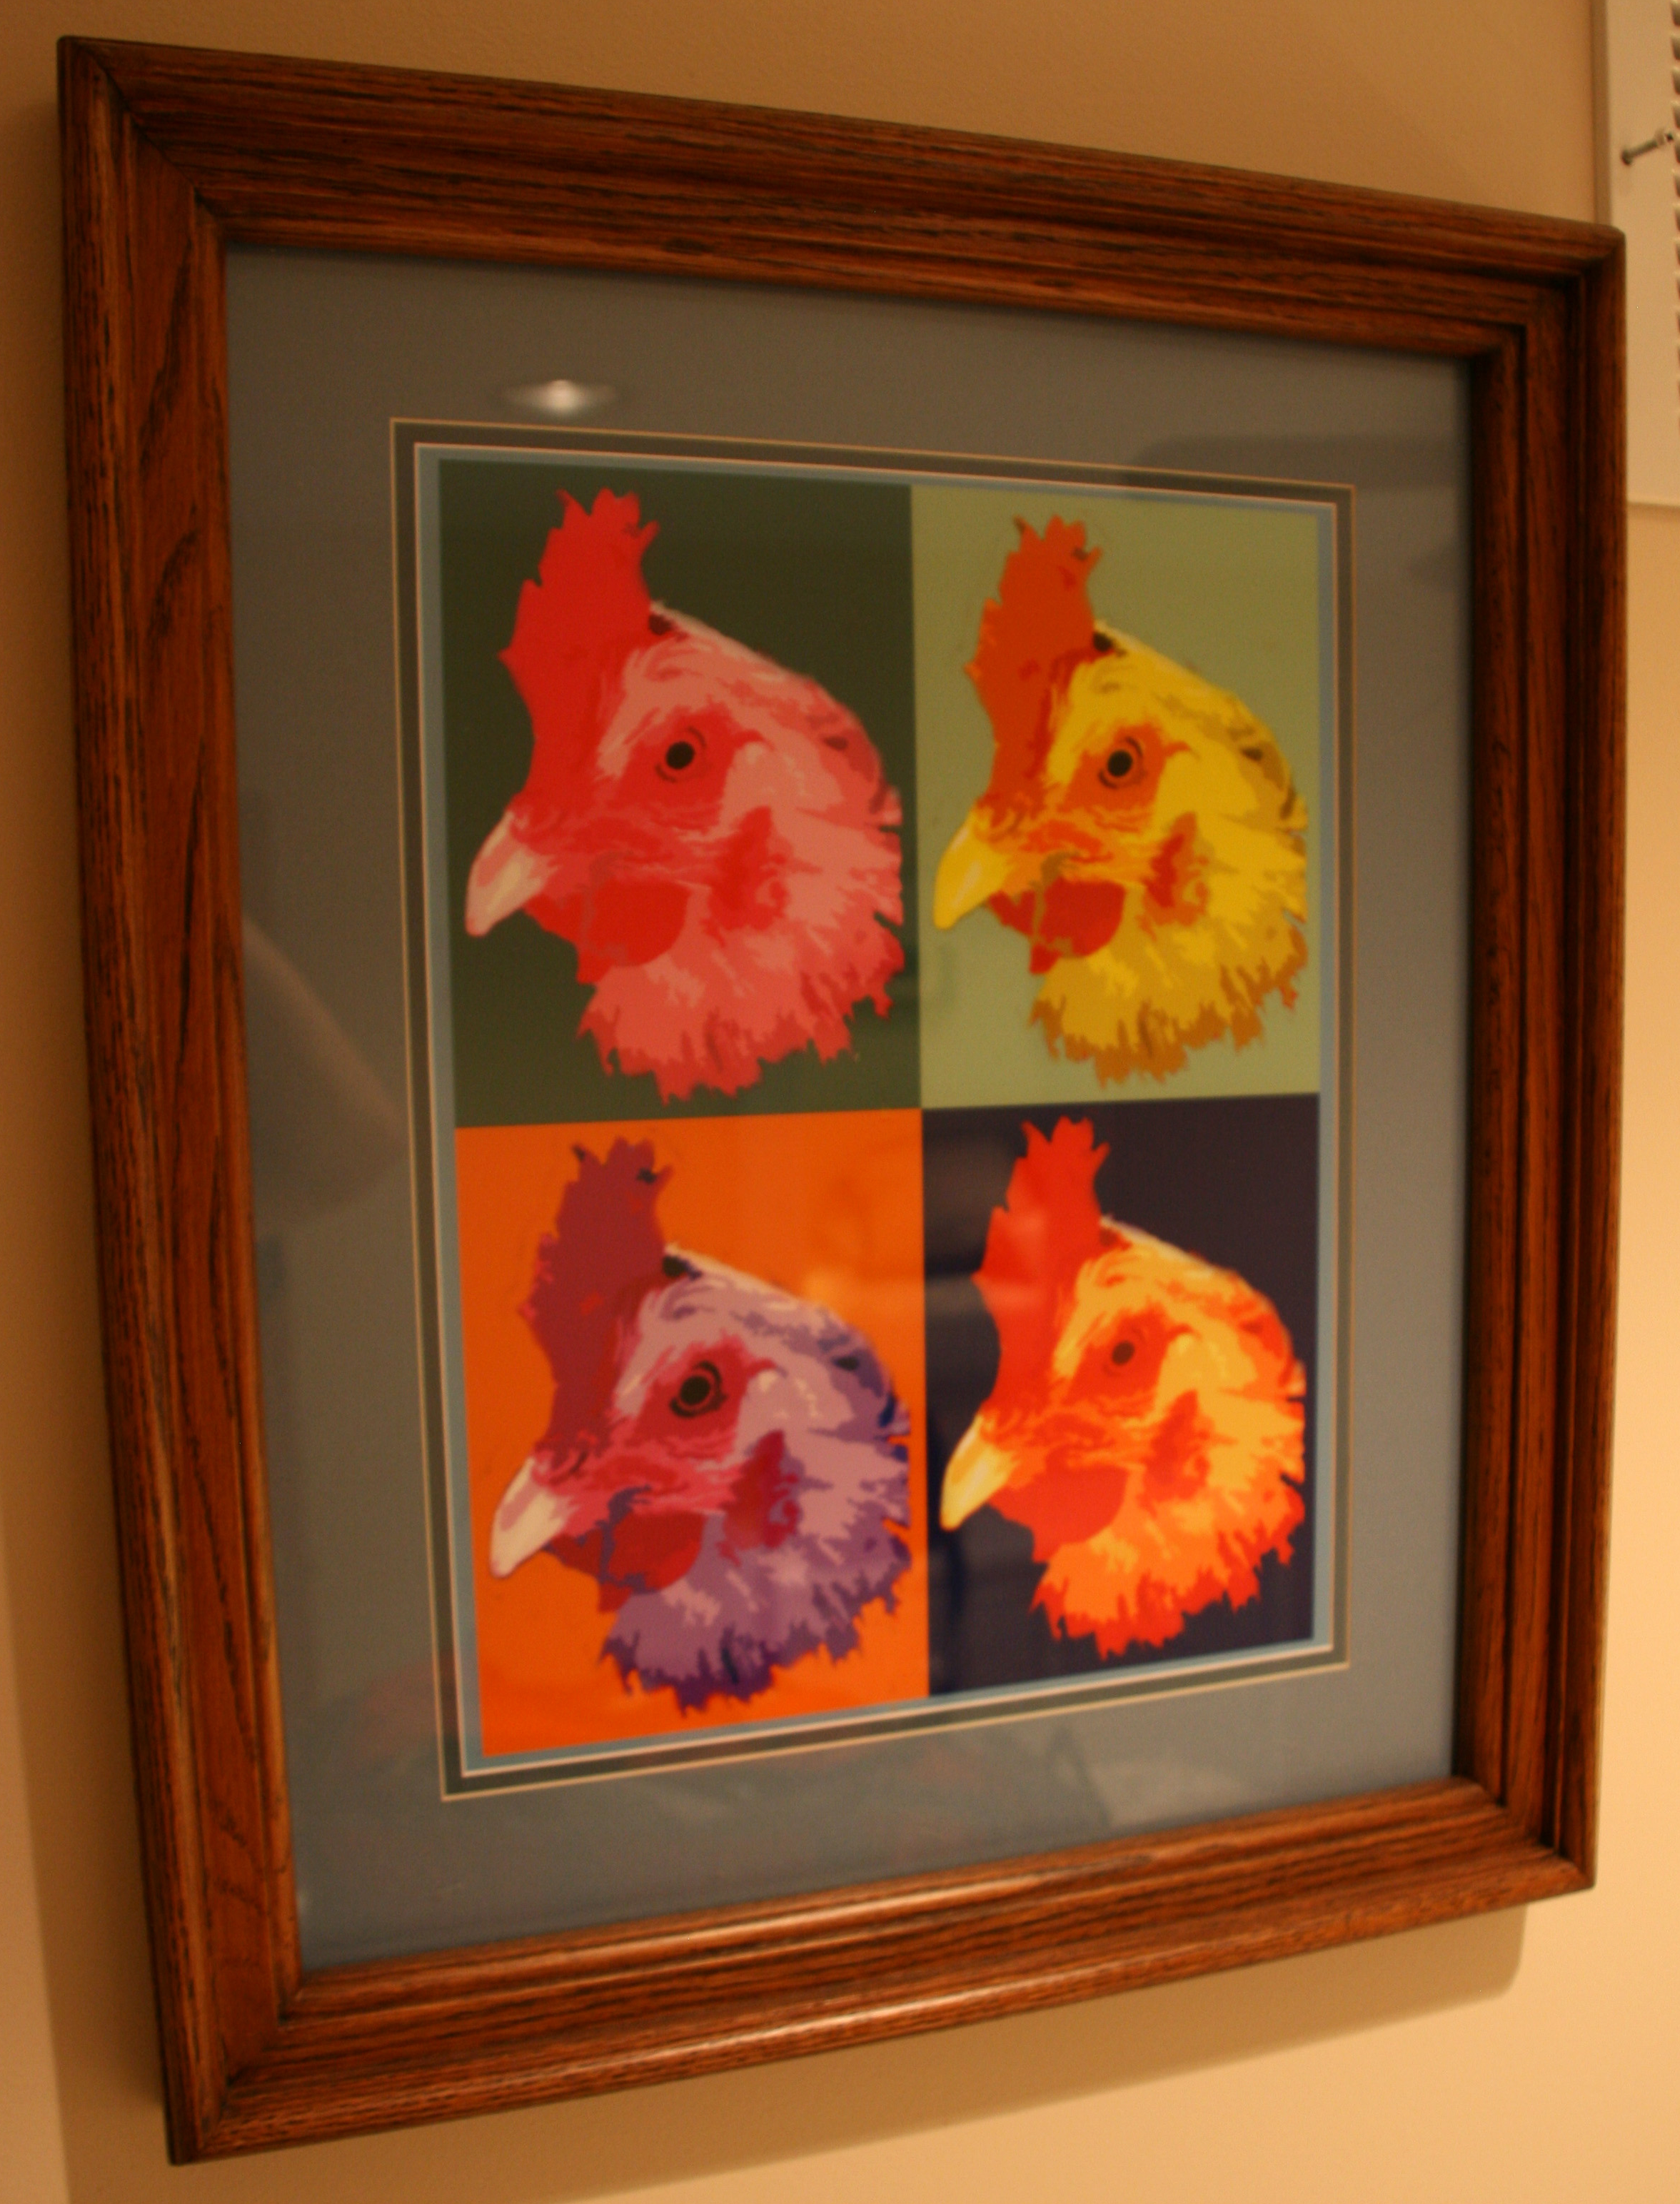 Warhol would absolutely have done chickens if only he'd thought of it.